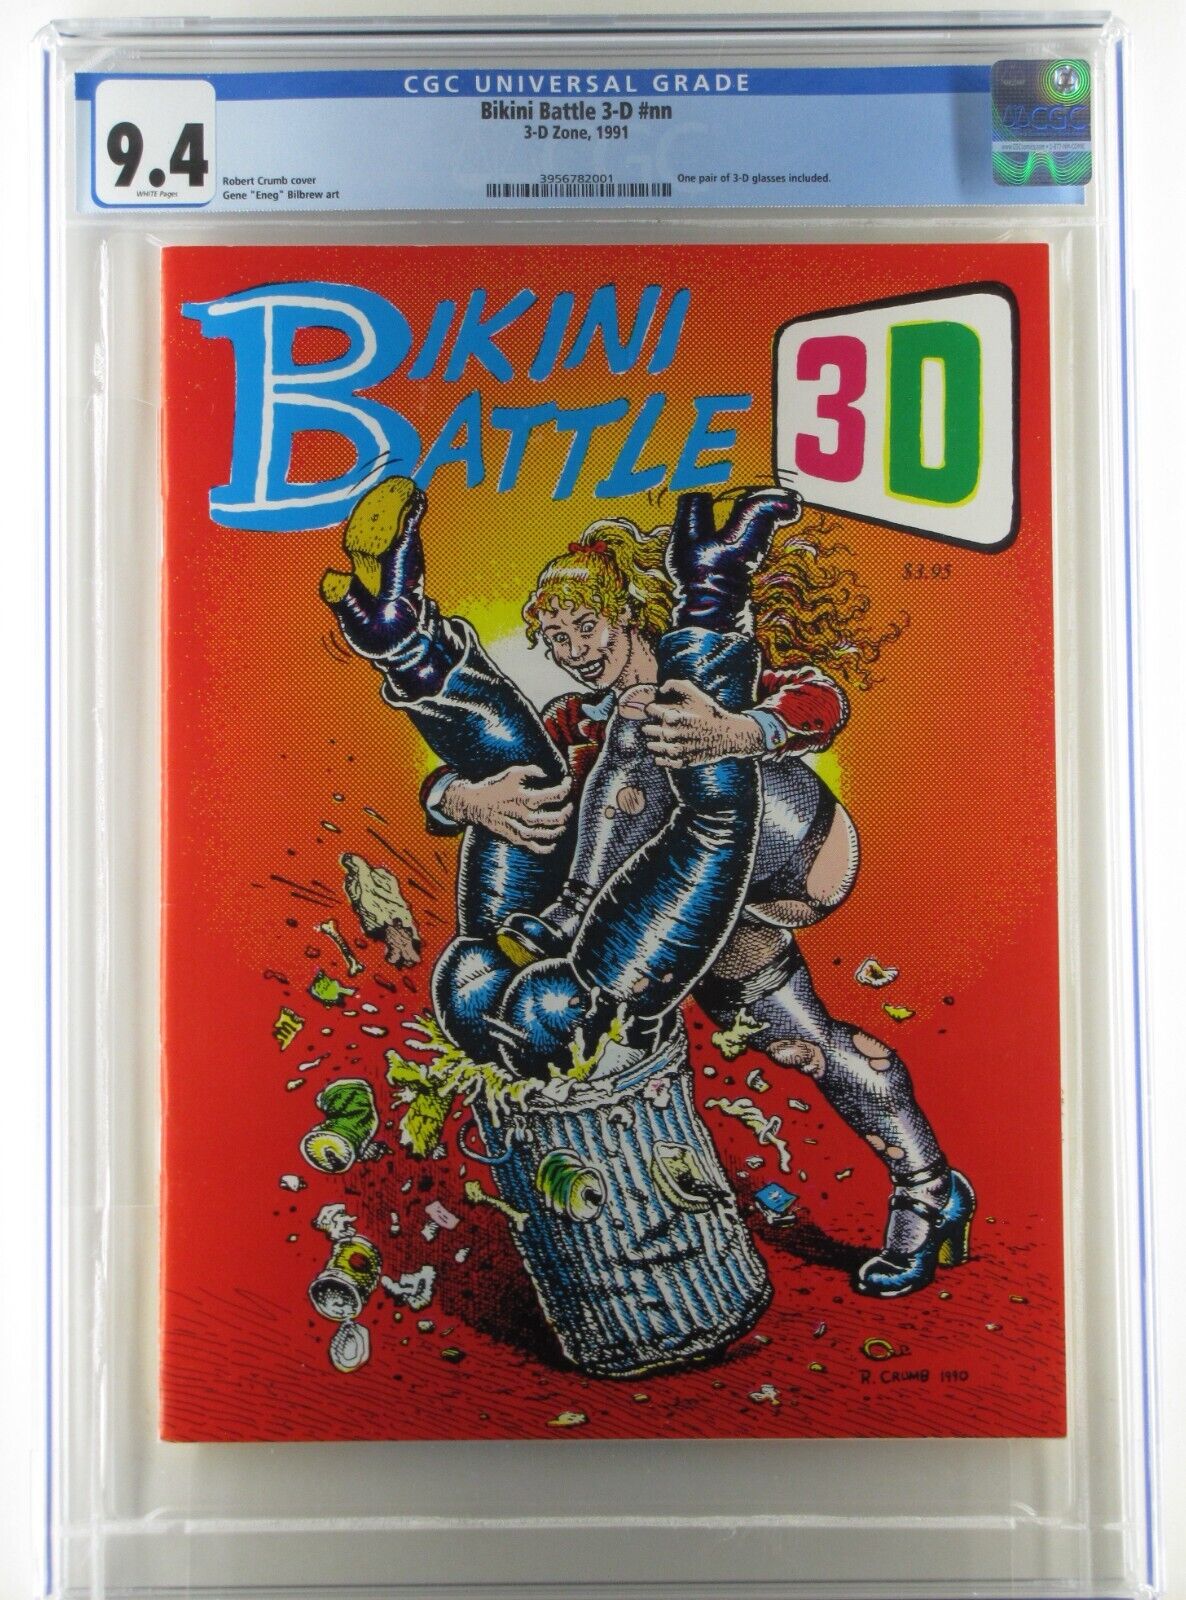 Bikini Battle 3D 1991 CGC 9.4 Only One in CGC Census Robert Crumb Extremely Rare